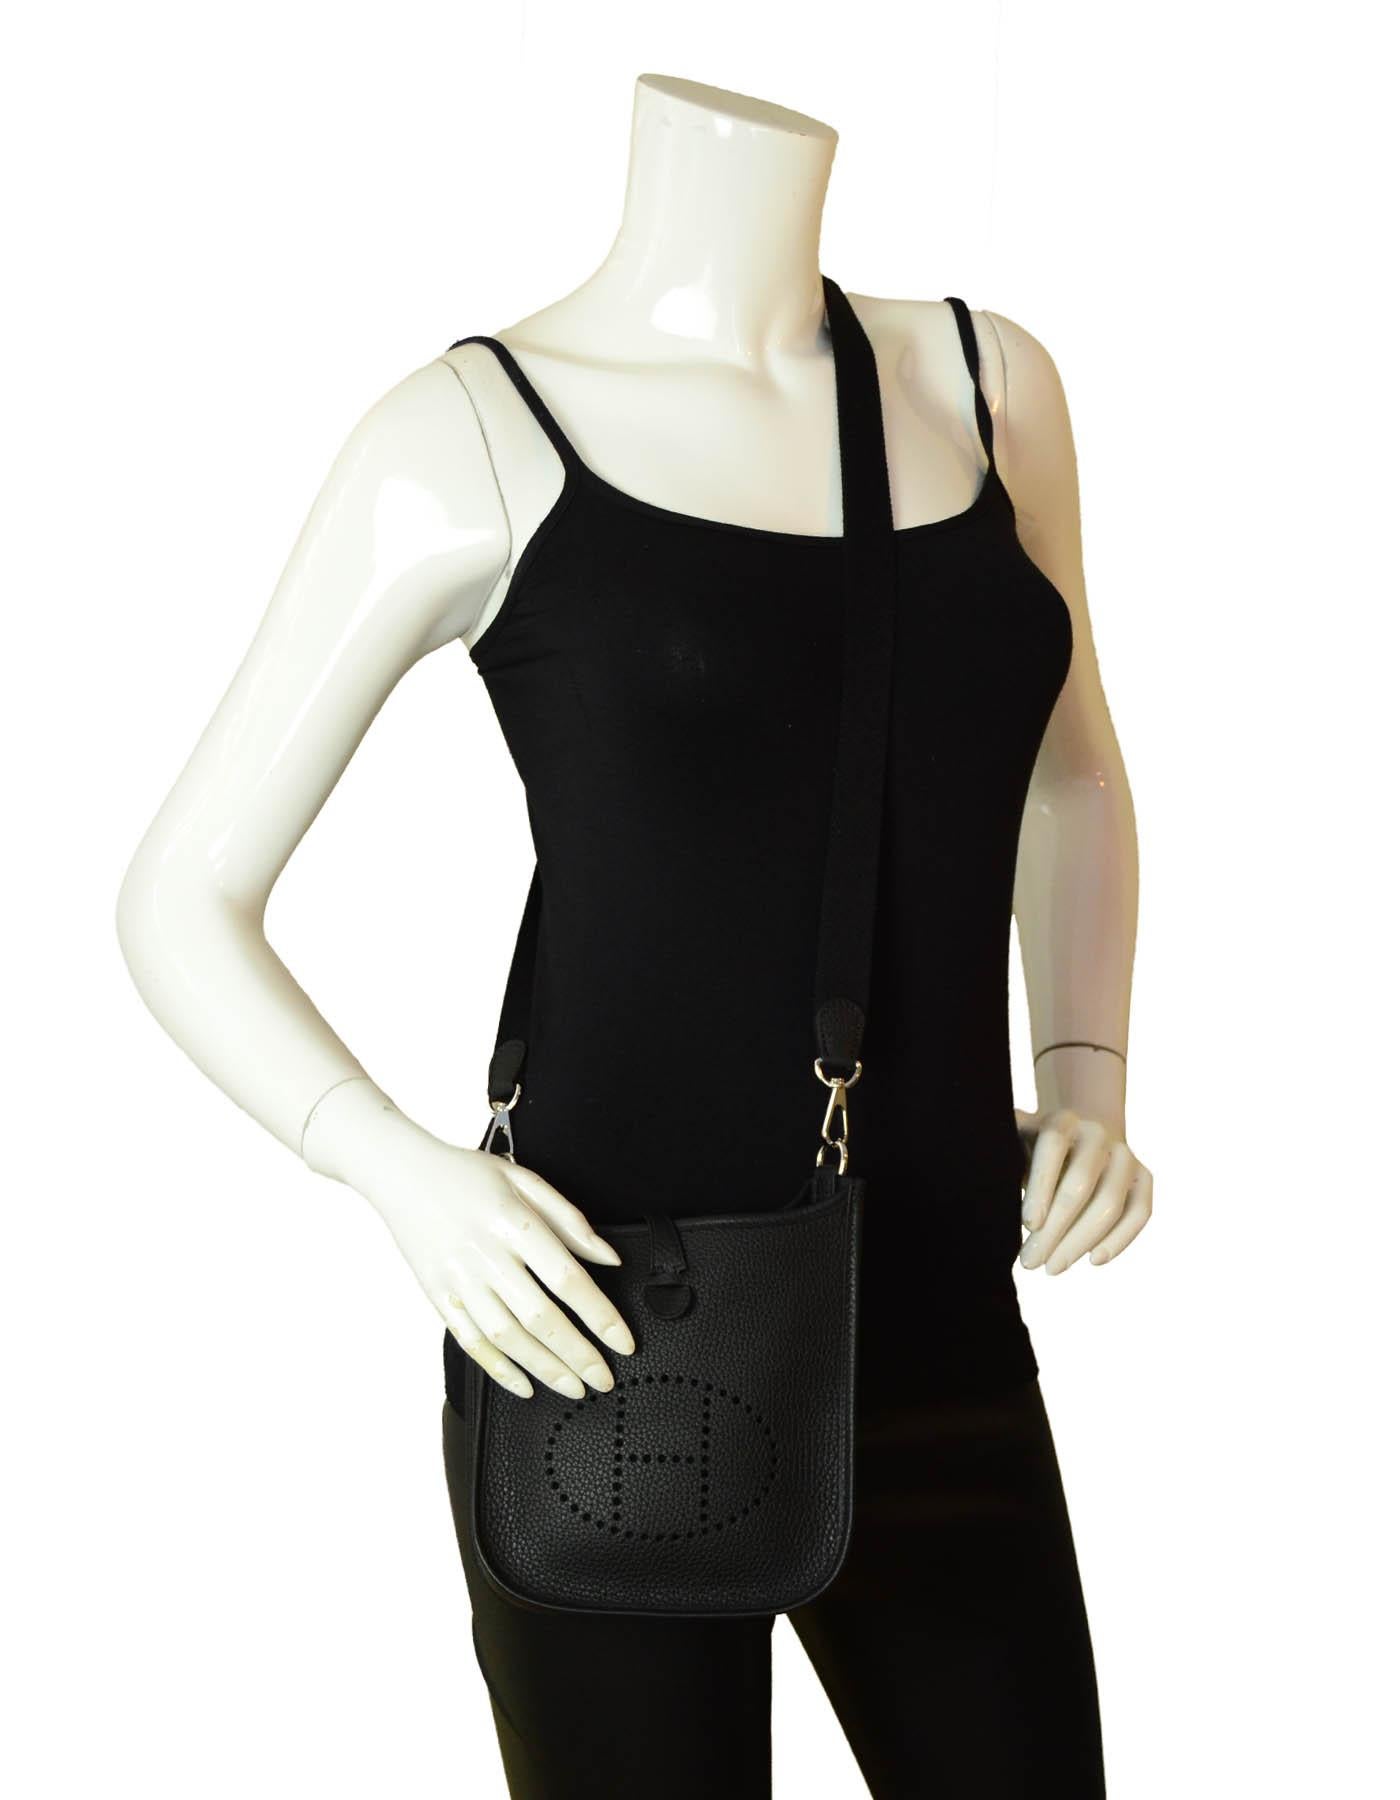 Hermes Black Taurillon Clemence Leather Evelyne TPM Crossbody Bag

Made In: France
Year of Production: 2020
Color: Black
Hardware: Silvertone palladium
Materials: Clemence leather
Lining: Suede
Closure/Opening: Open top with middle snap